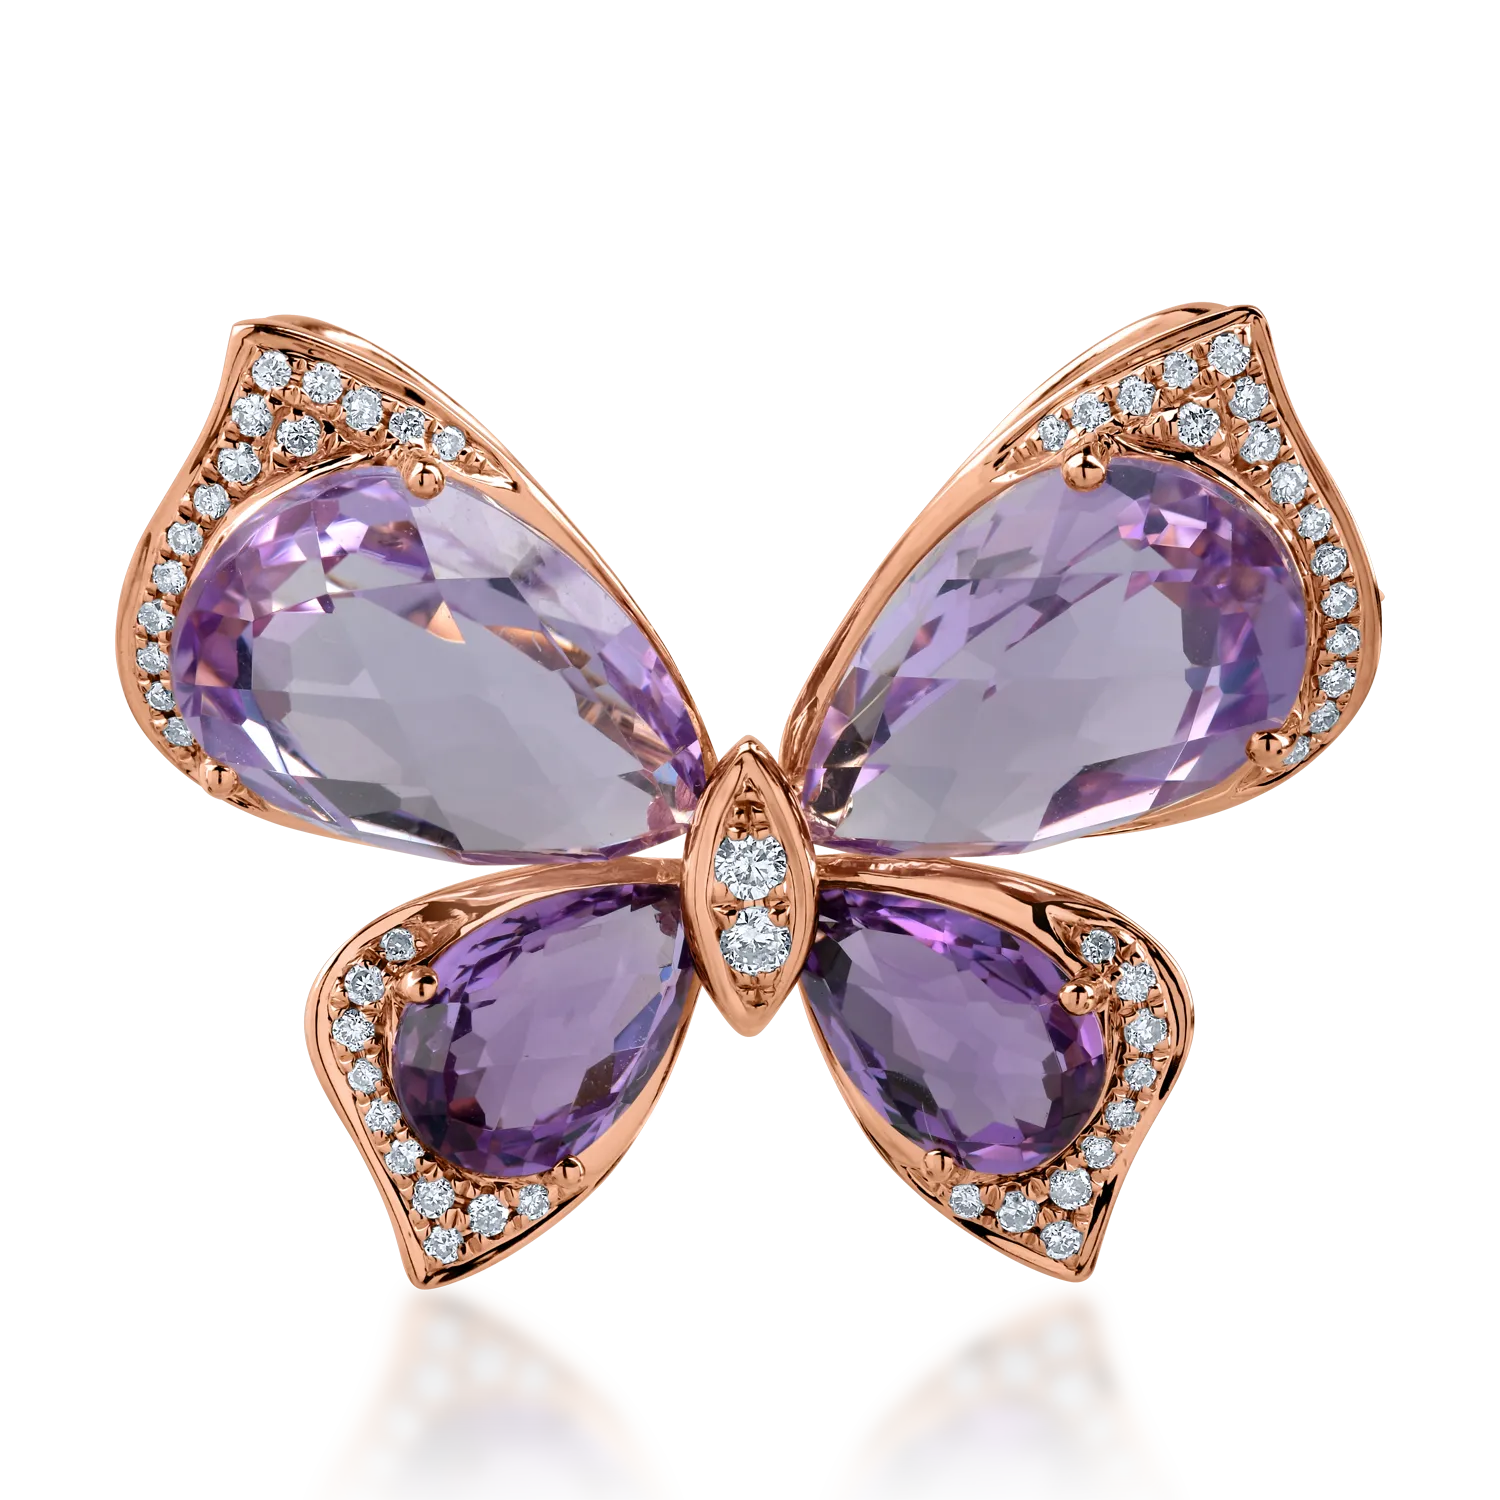 Rose gold butterfly brooch with 8.6ct amethysts and 0.23ct diamonds